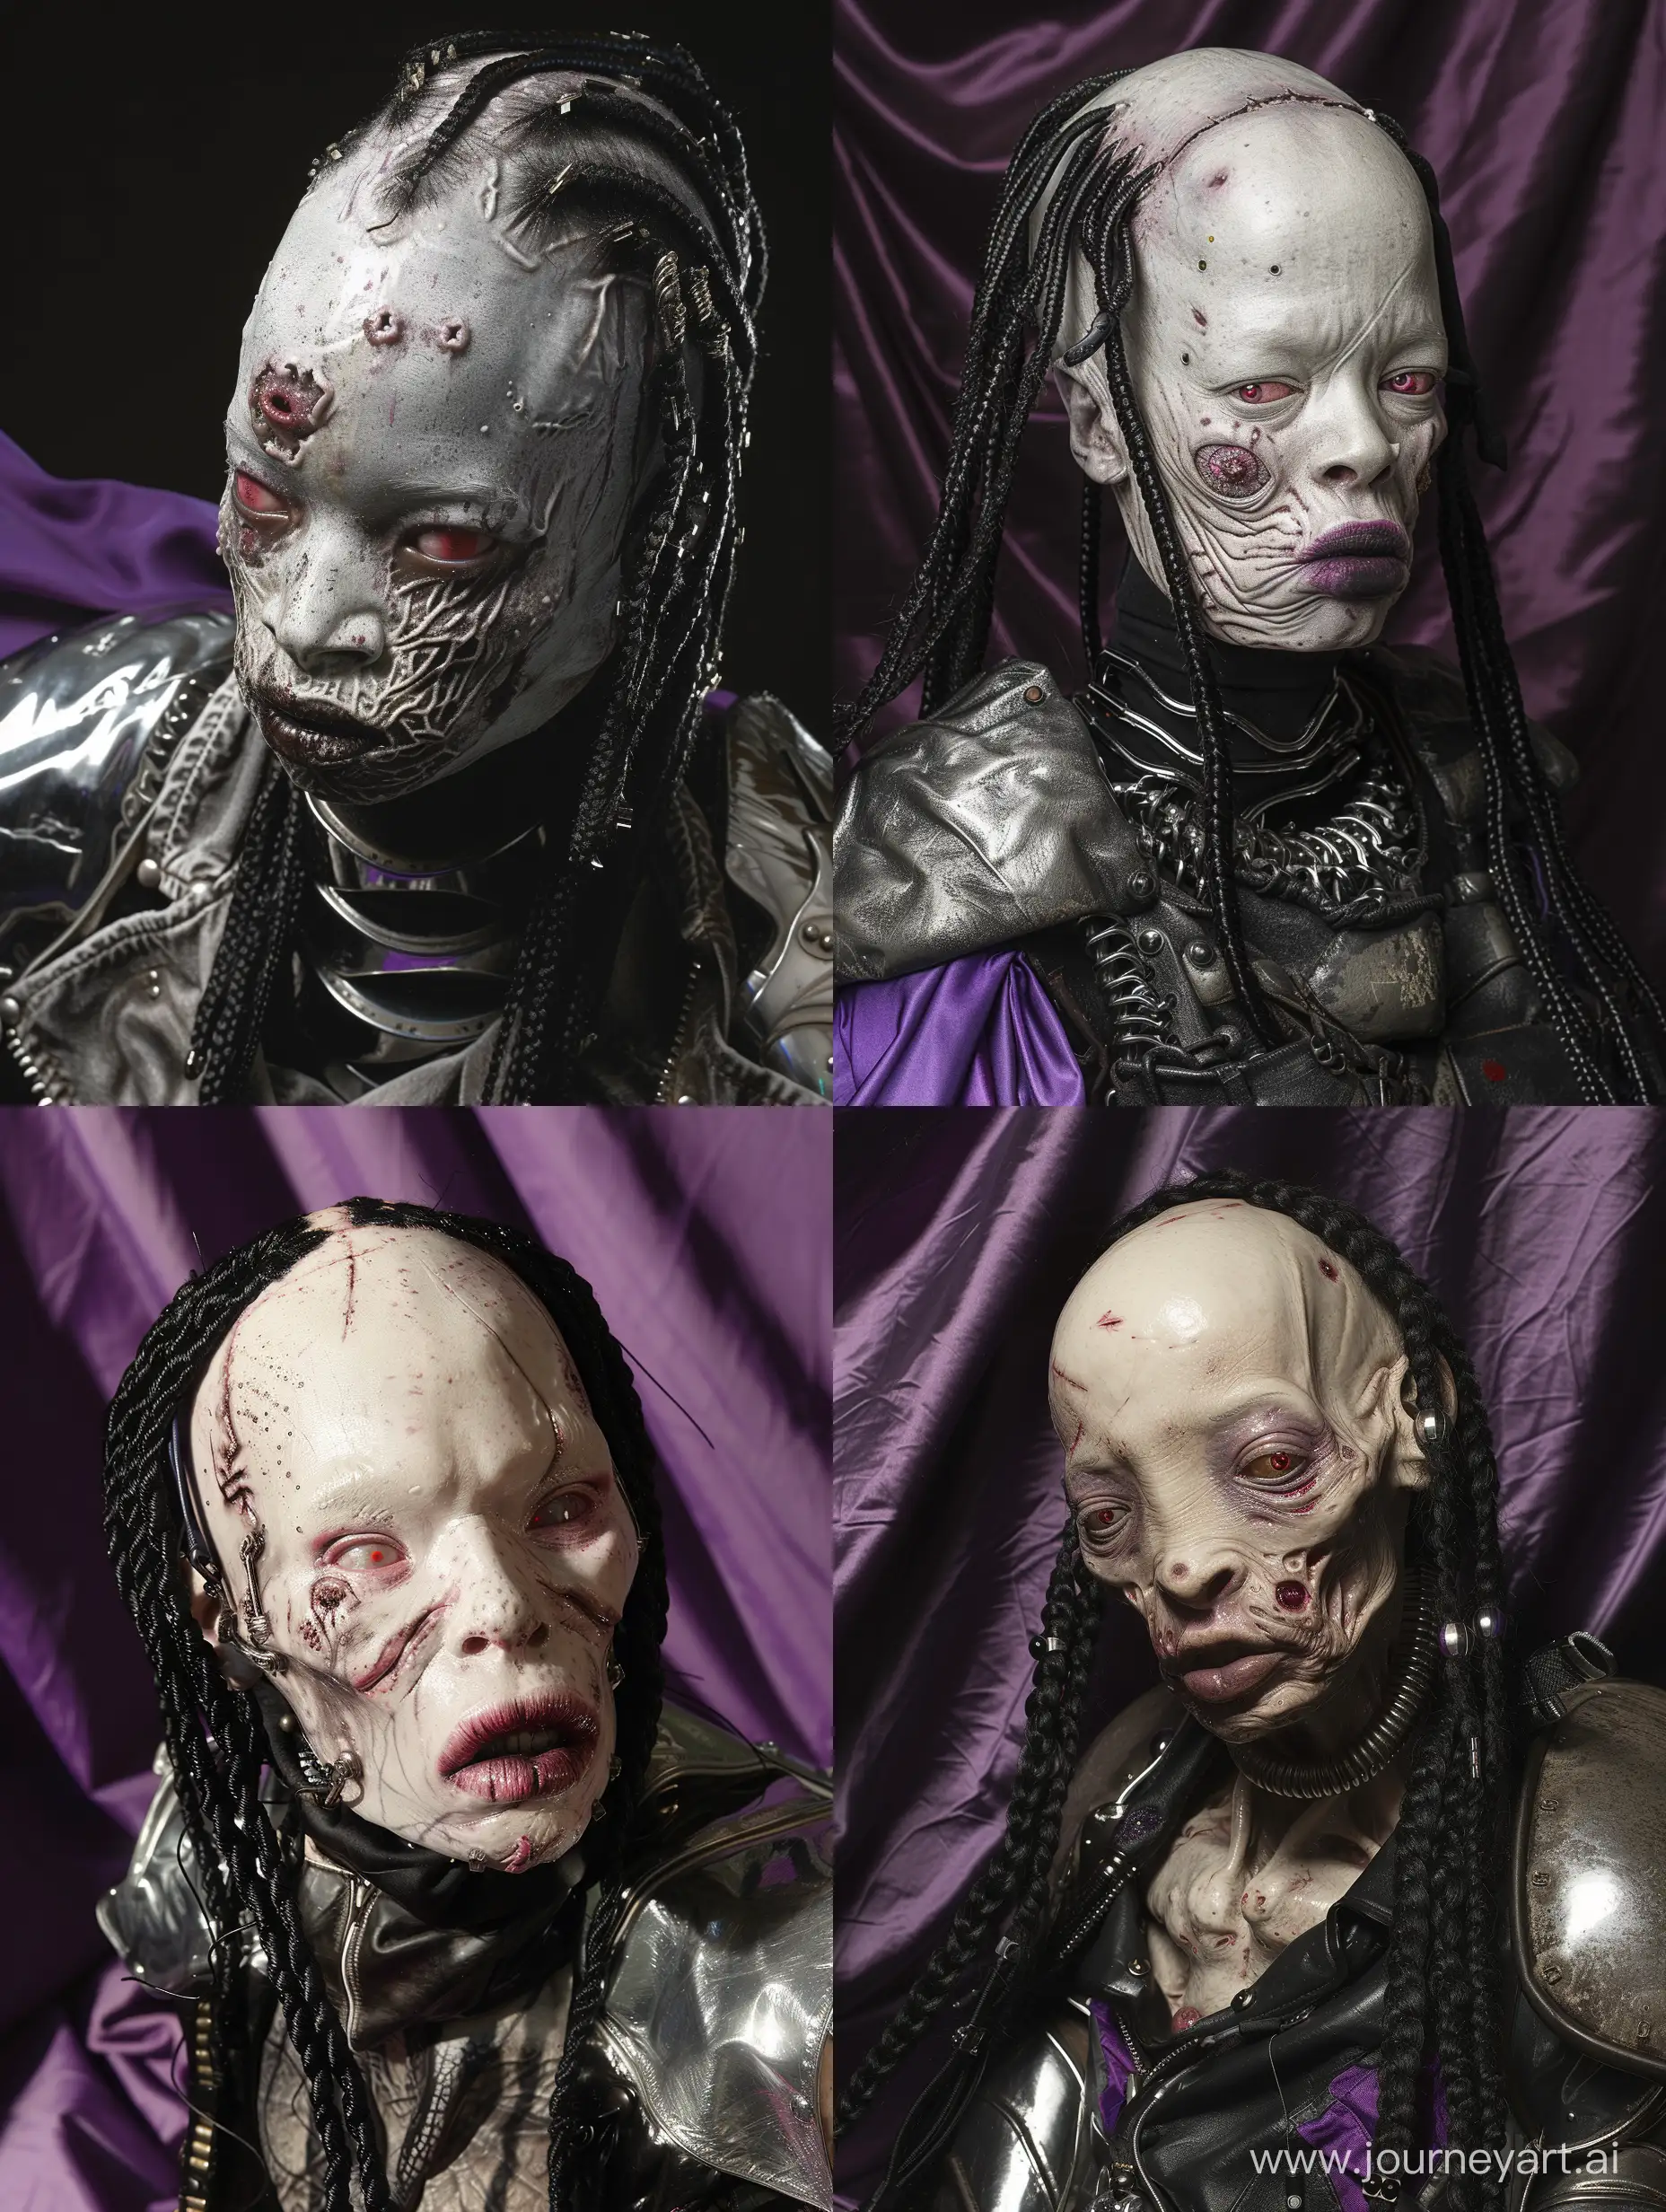 a portrait of an alien human hybrid, grotesque, sores, wet black braids, weathered leather, chrome plated, evil expression, pale skin, albinism, one tiny red eye, dramatic rim lighting, depth of field, purple accent fabric,